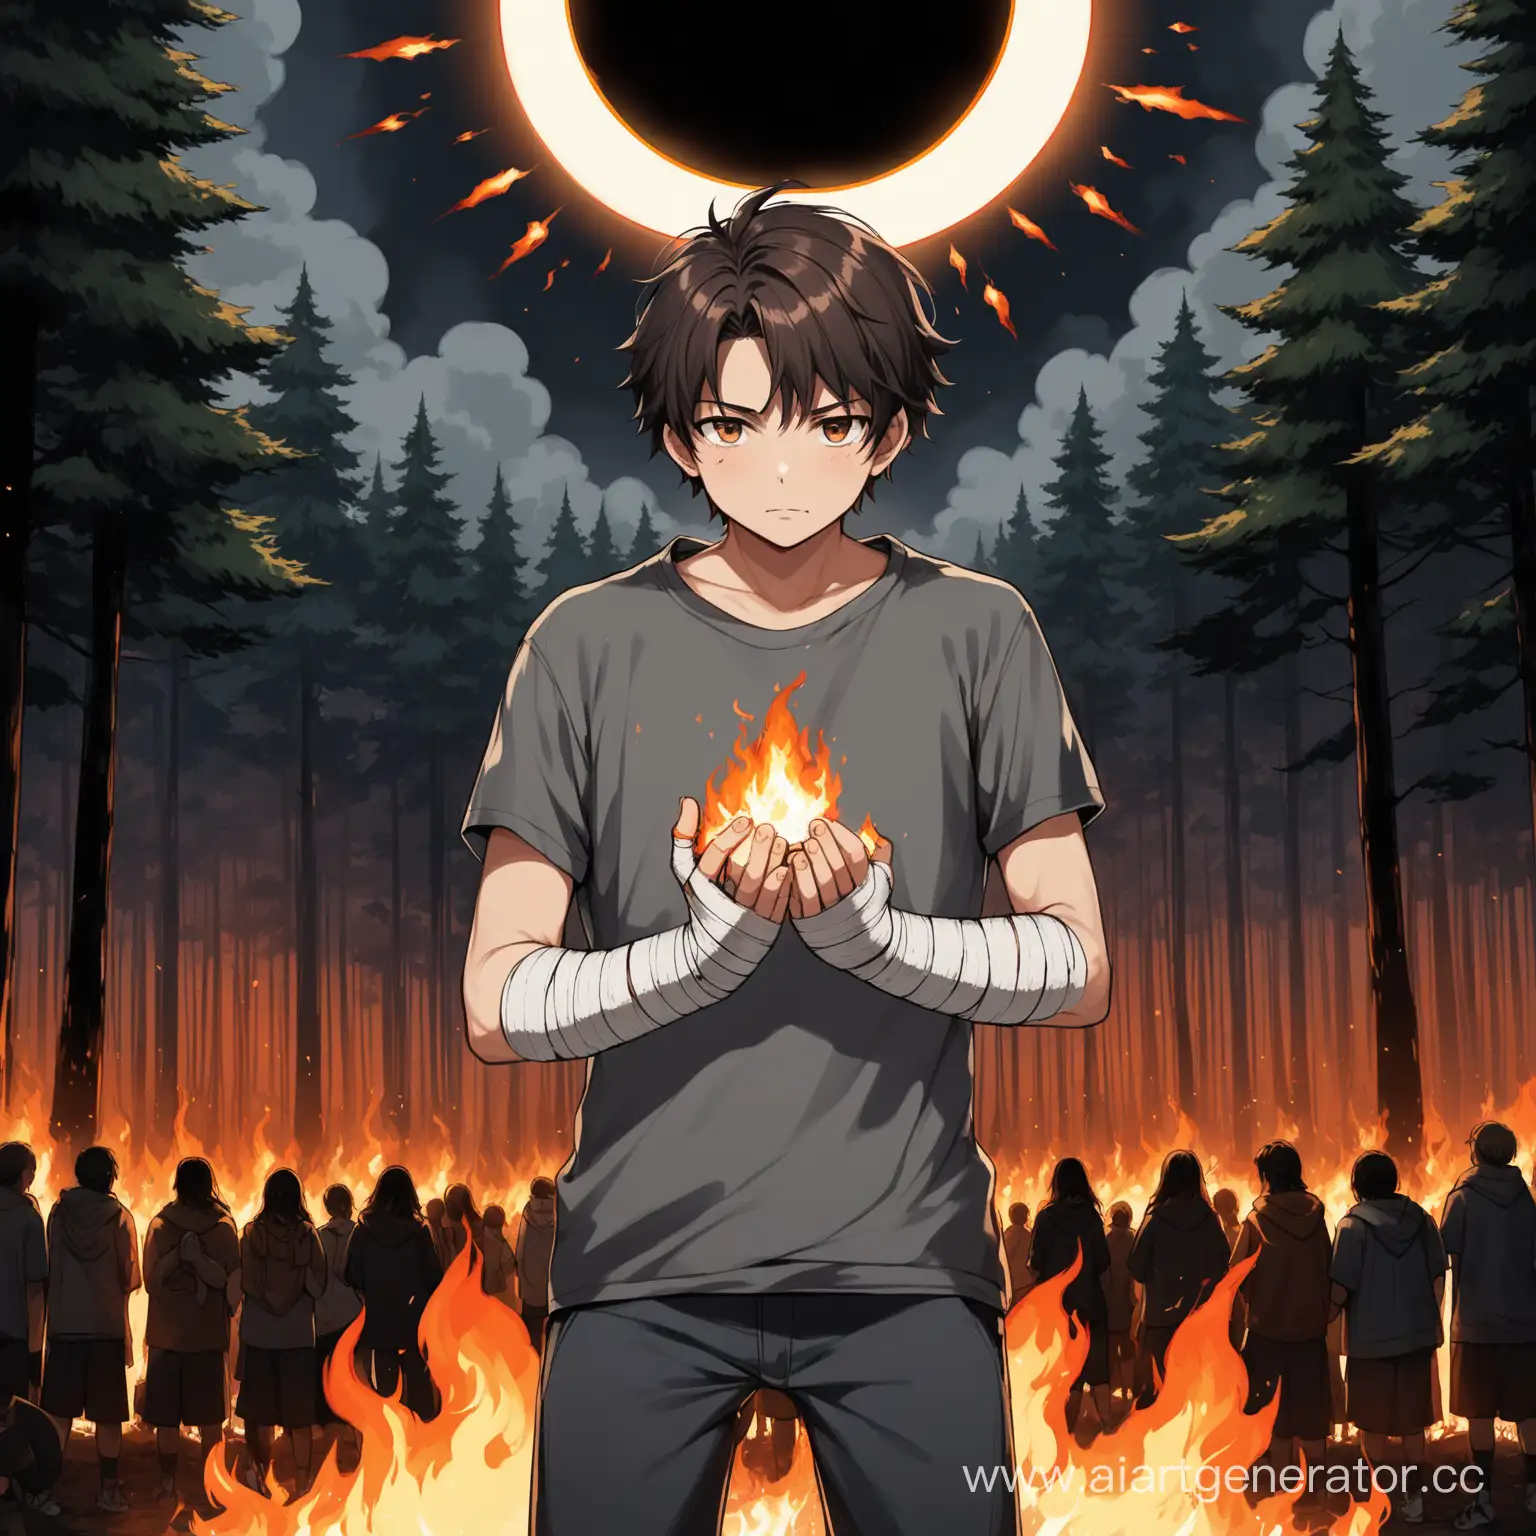 Young-Boy-in-Ritual-Fire-Circle-with-Fiery-Runes-and-Burning-Forest-Background